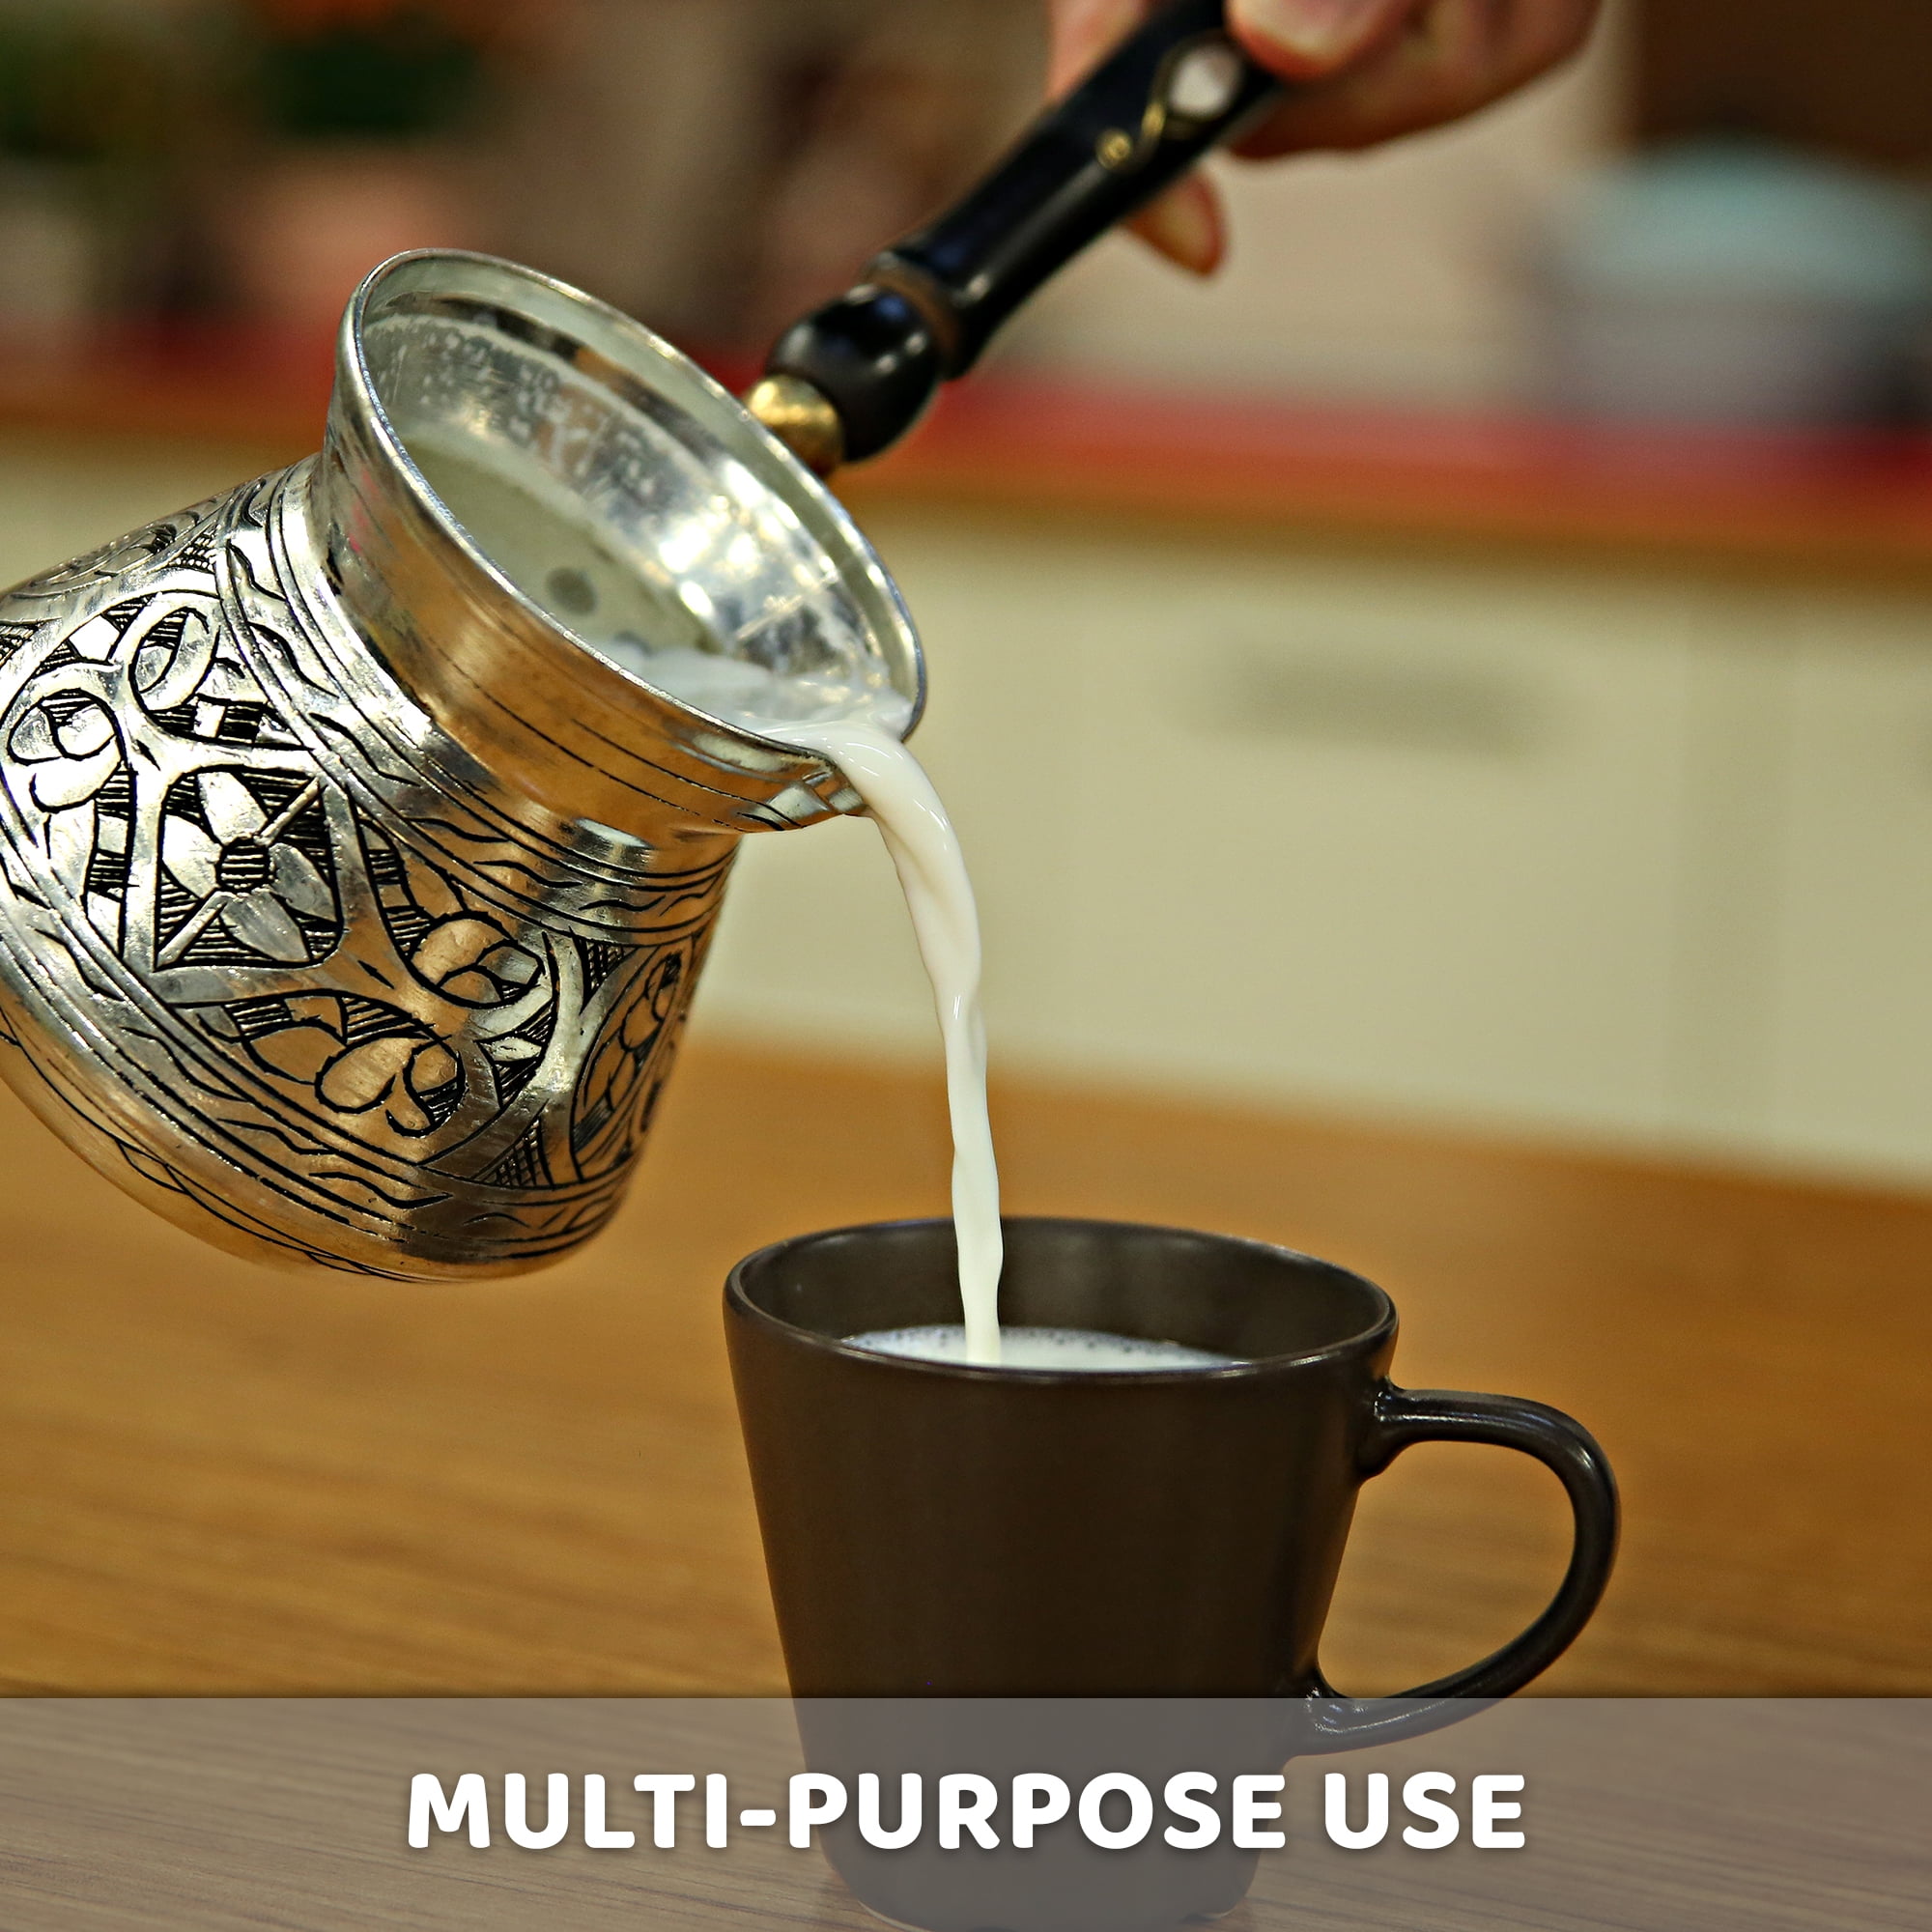 Coffee Is Prepared In The Turka, Coffee Pot, Coffee Maker, At Home